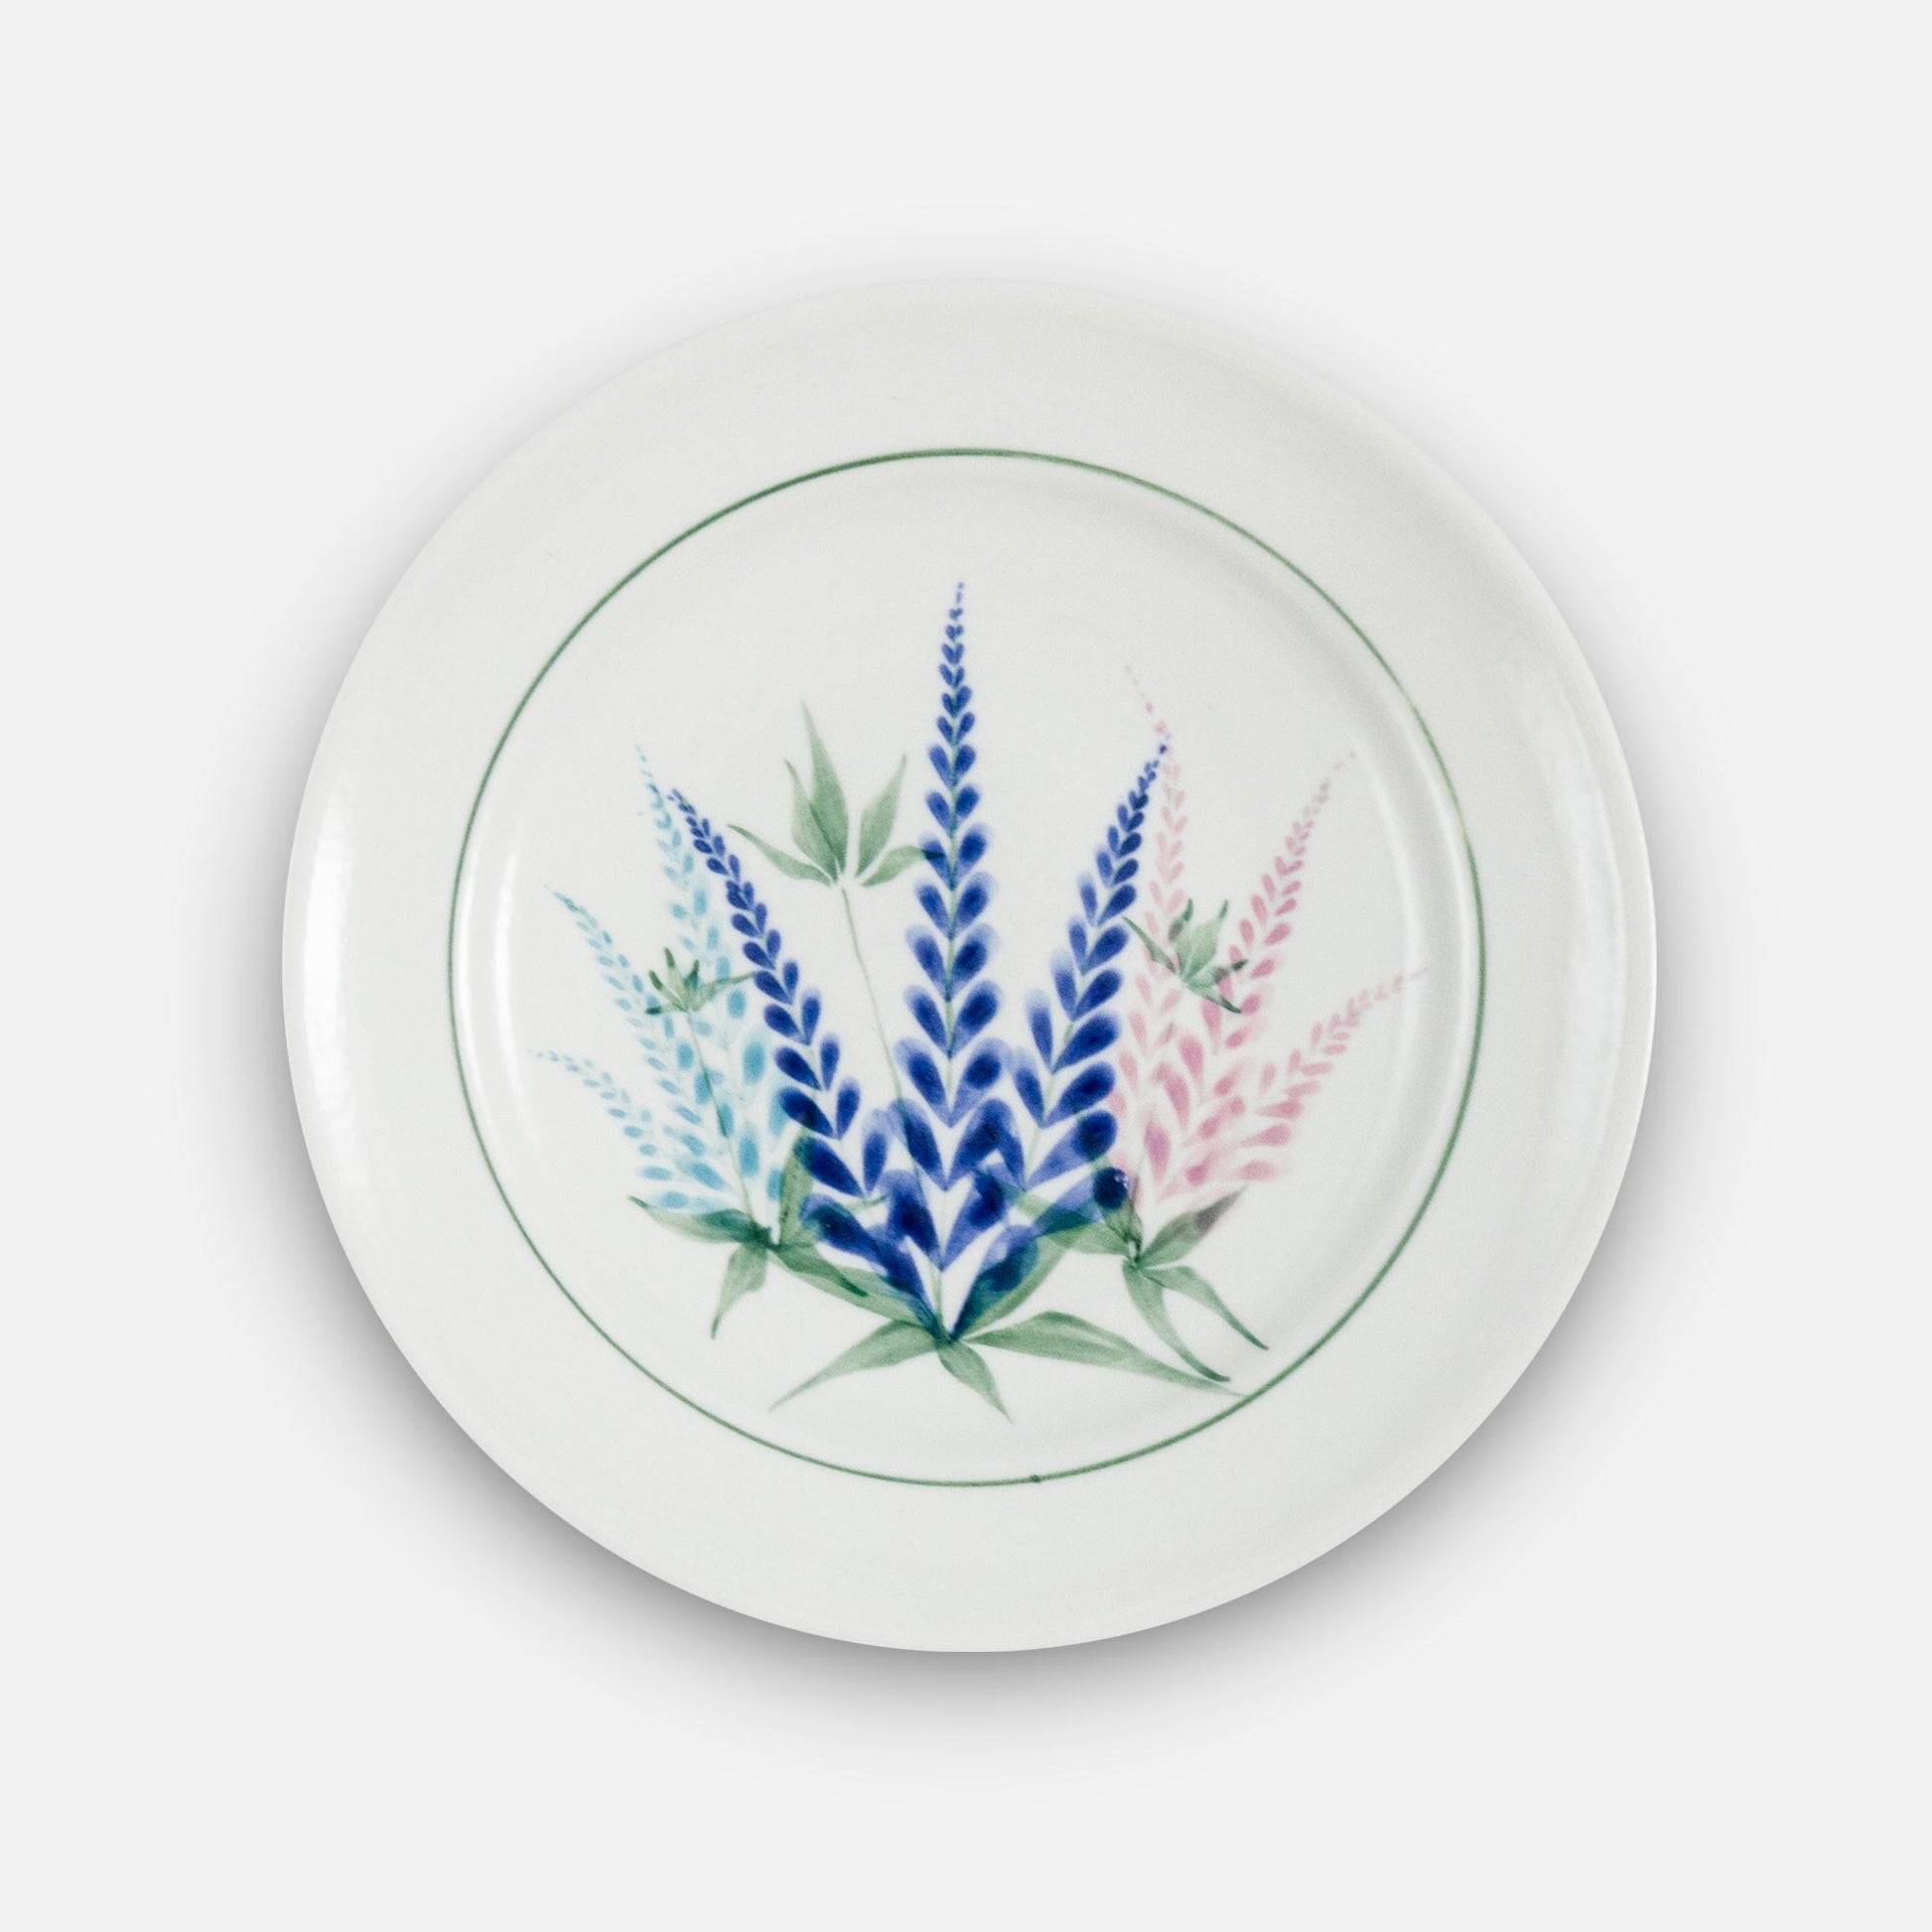 Handmade Pottery Rimless Dinner Plate made by Georgetown Pottery in Maine in Lupine pattern